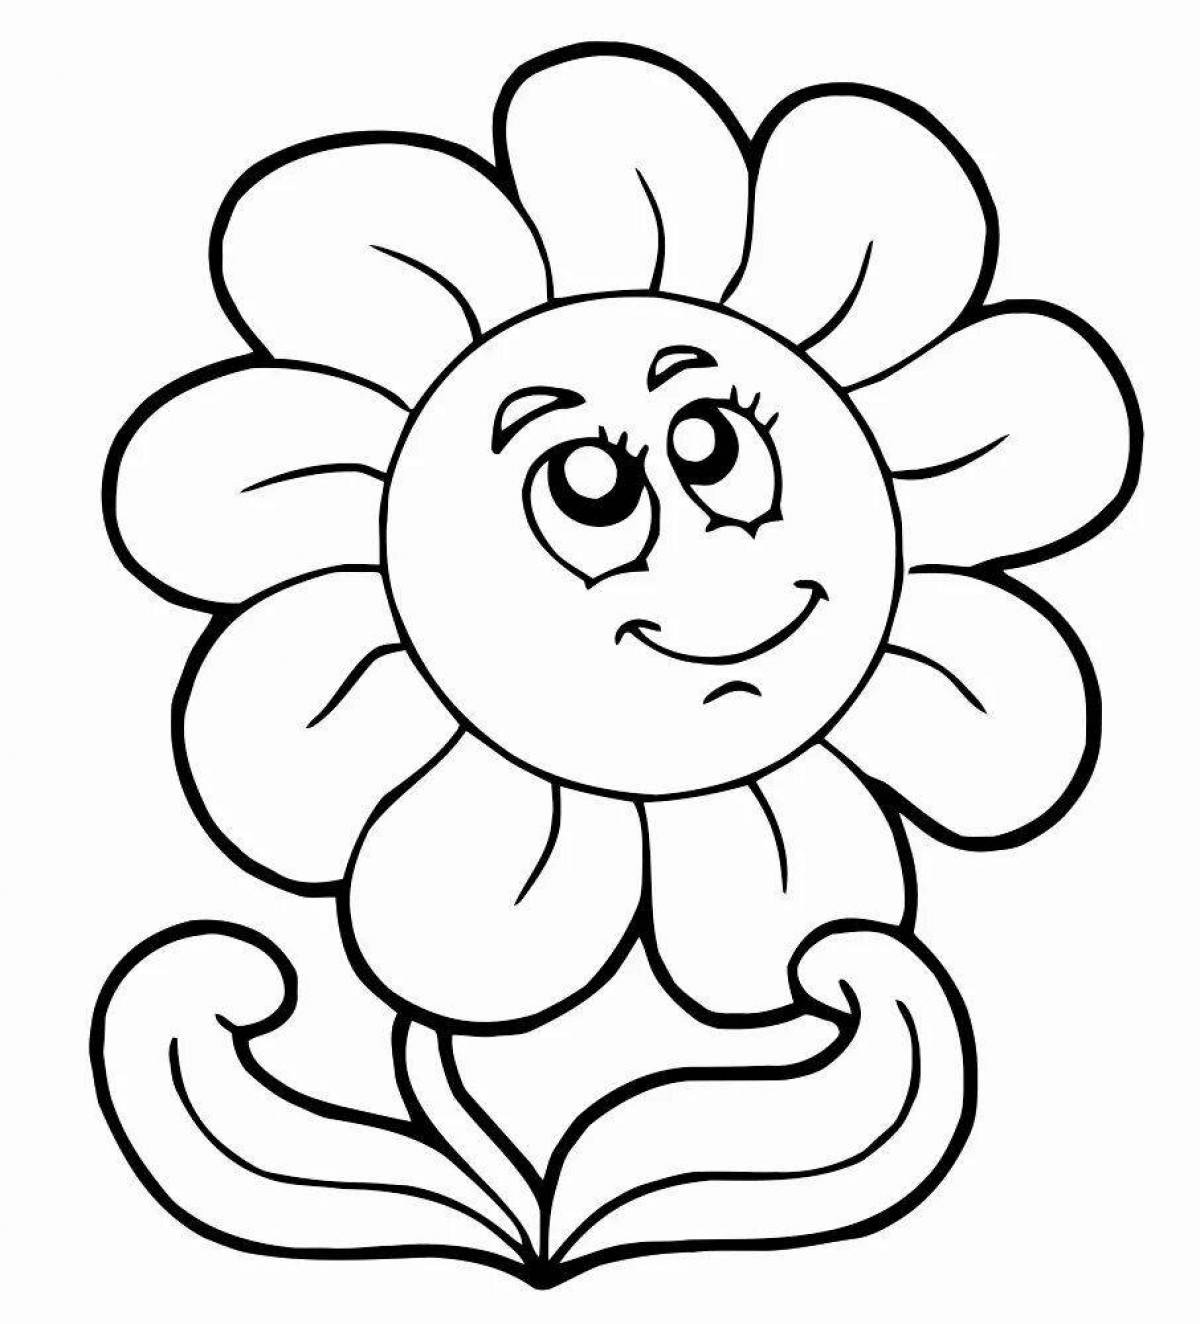 Bright flower coloring for kids